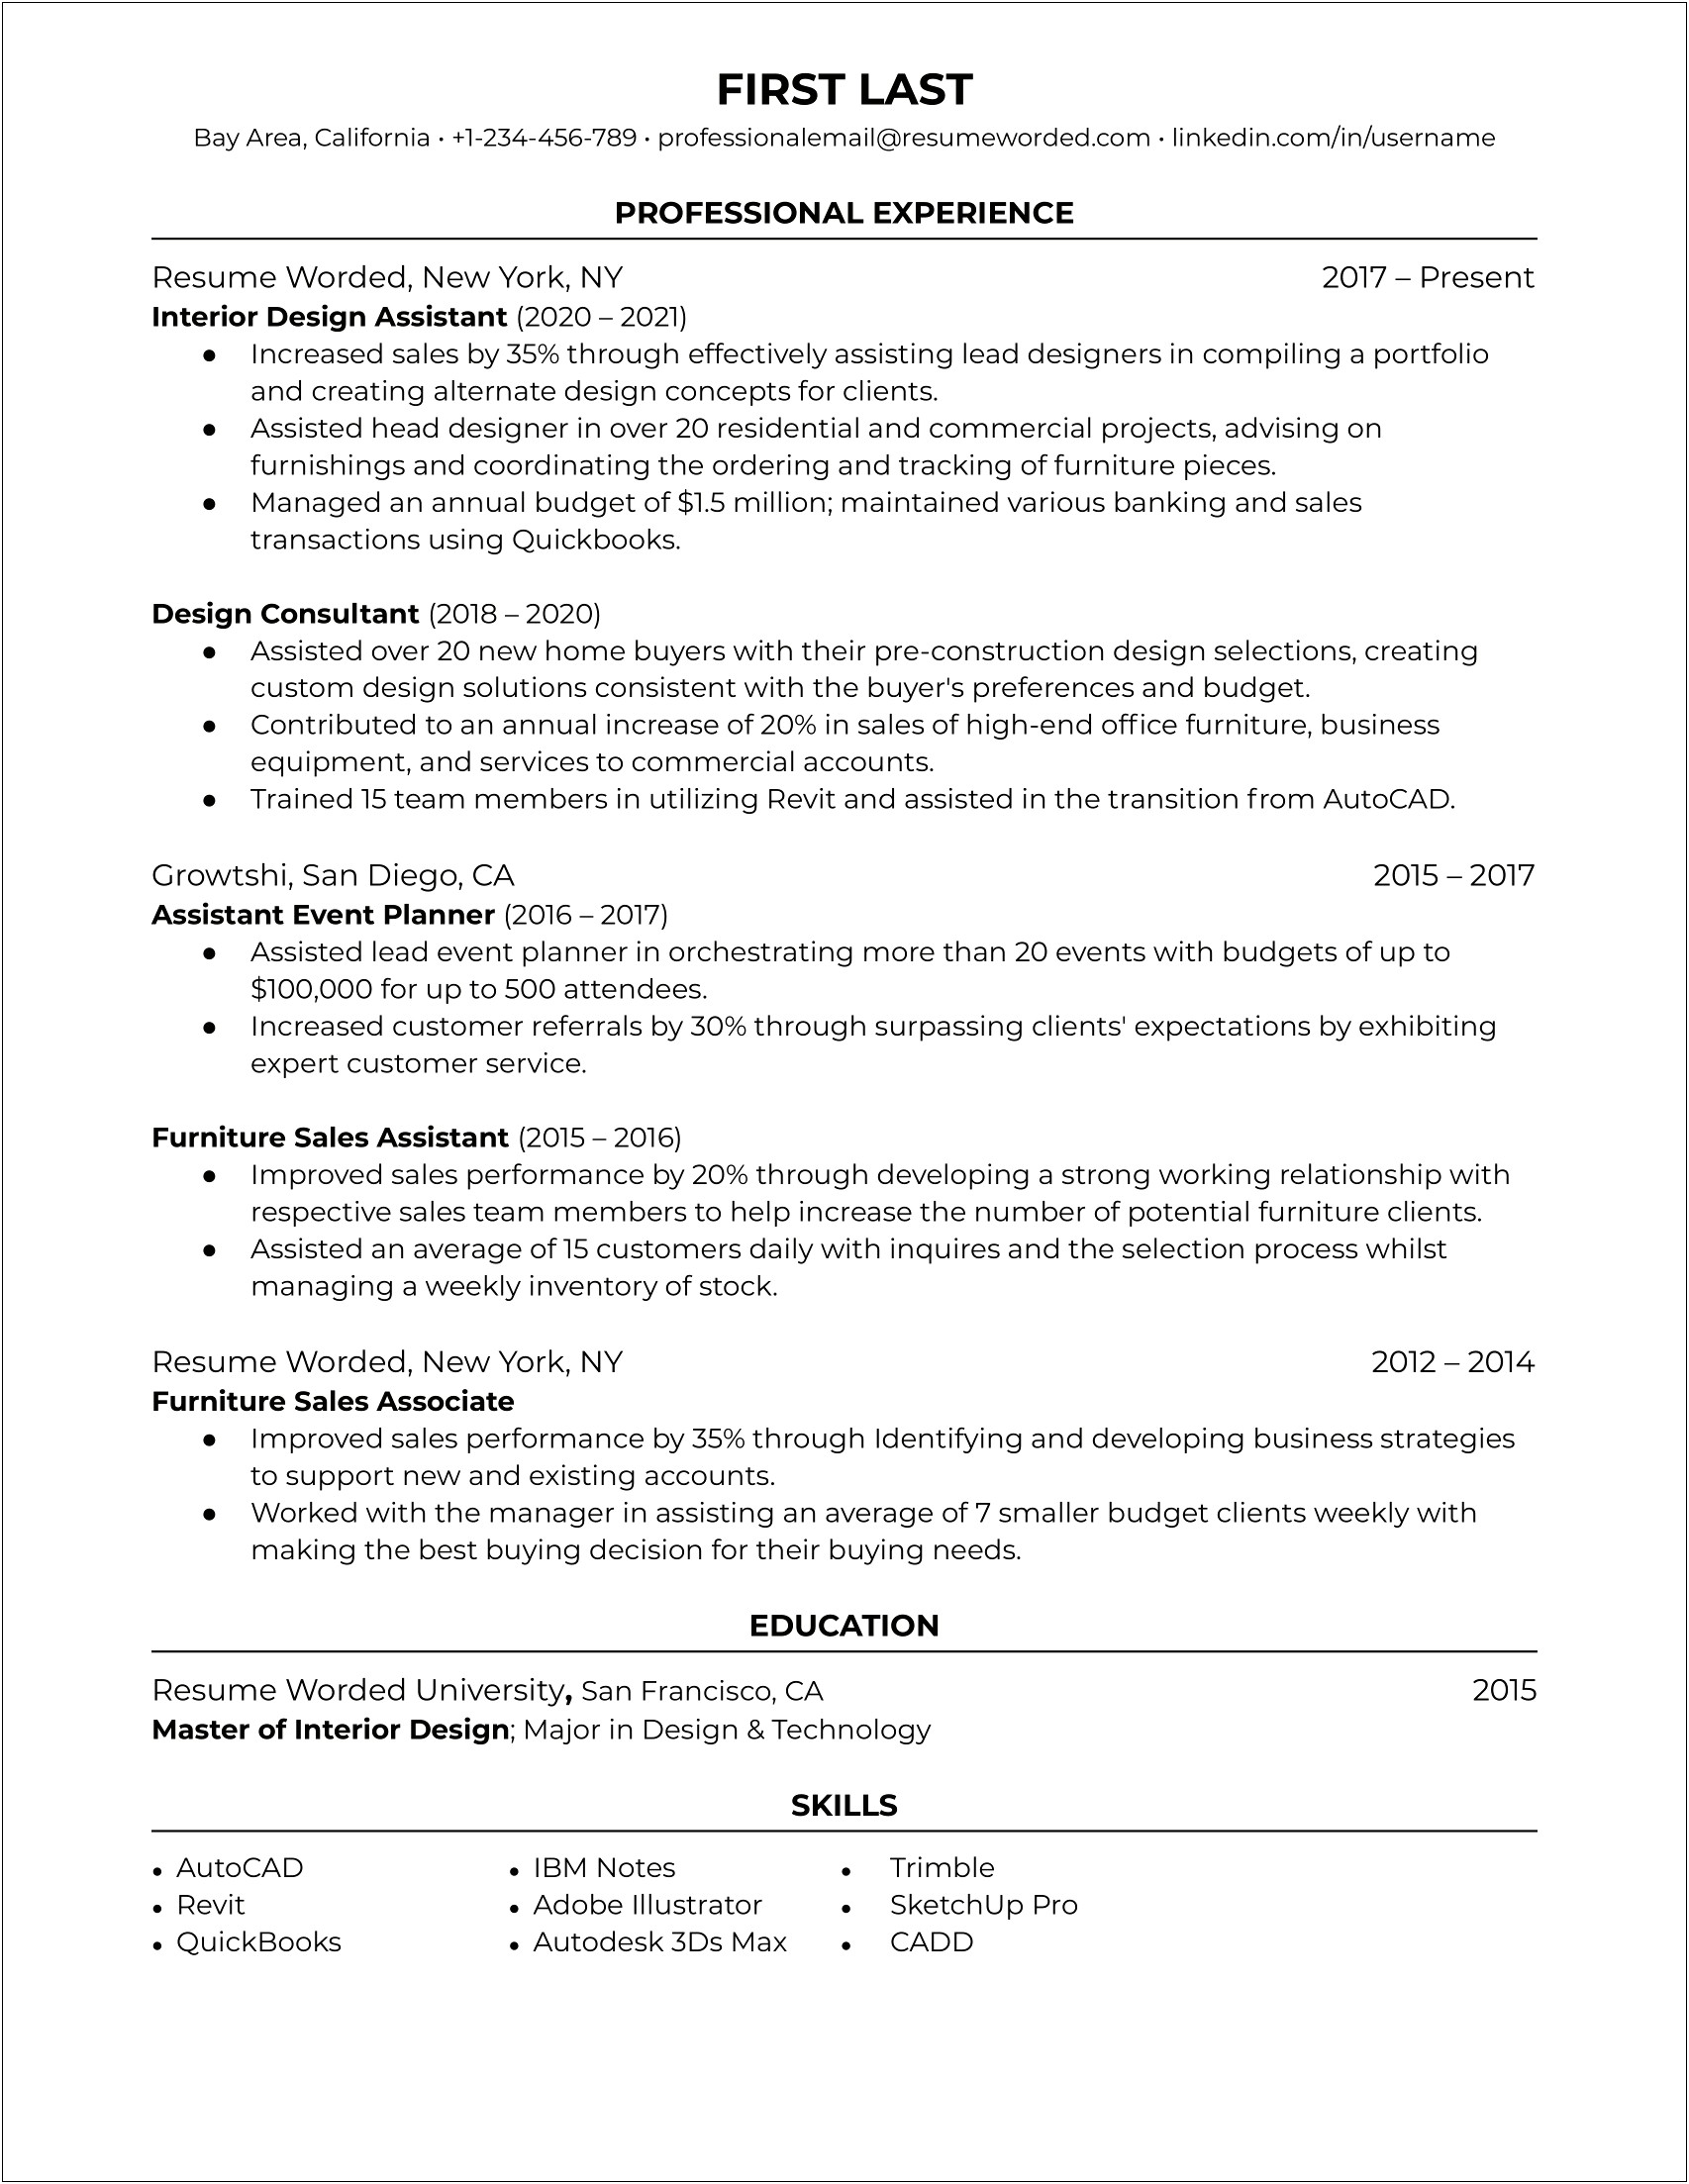 Resume Samples 2017 For Administrative Assistant